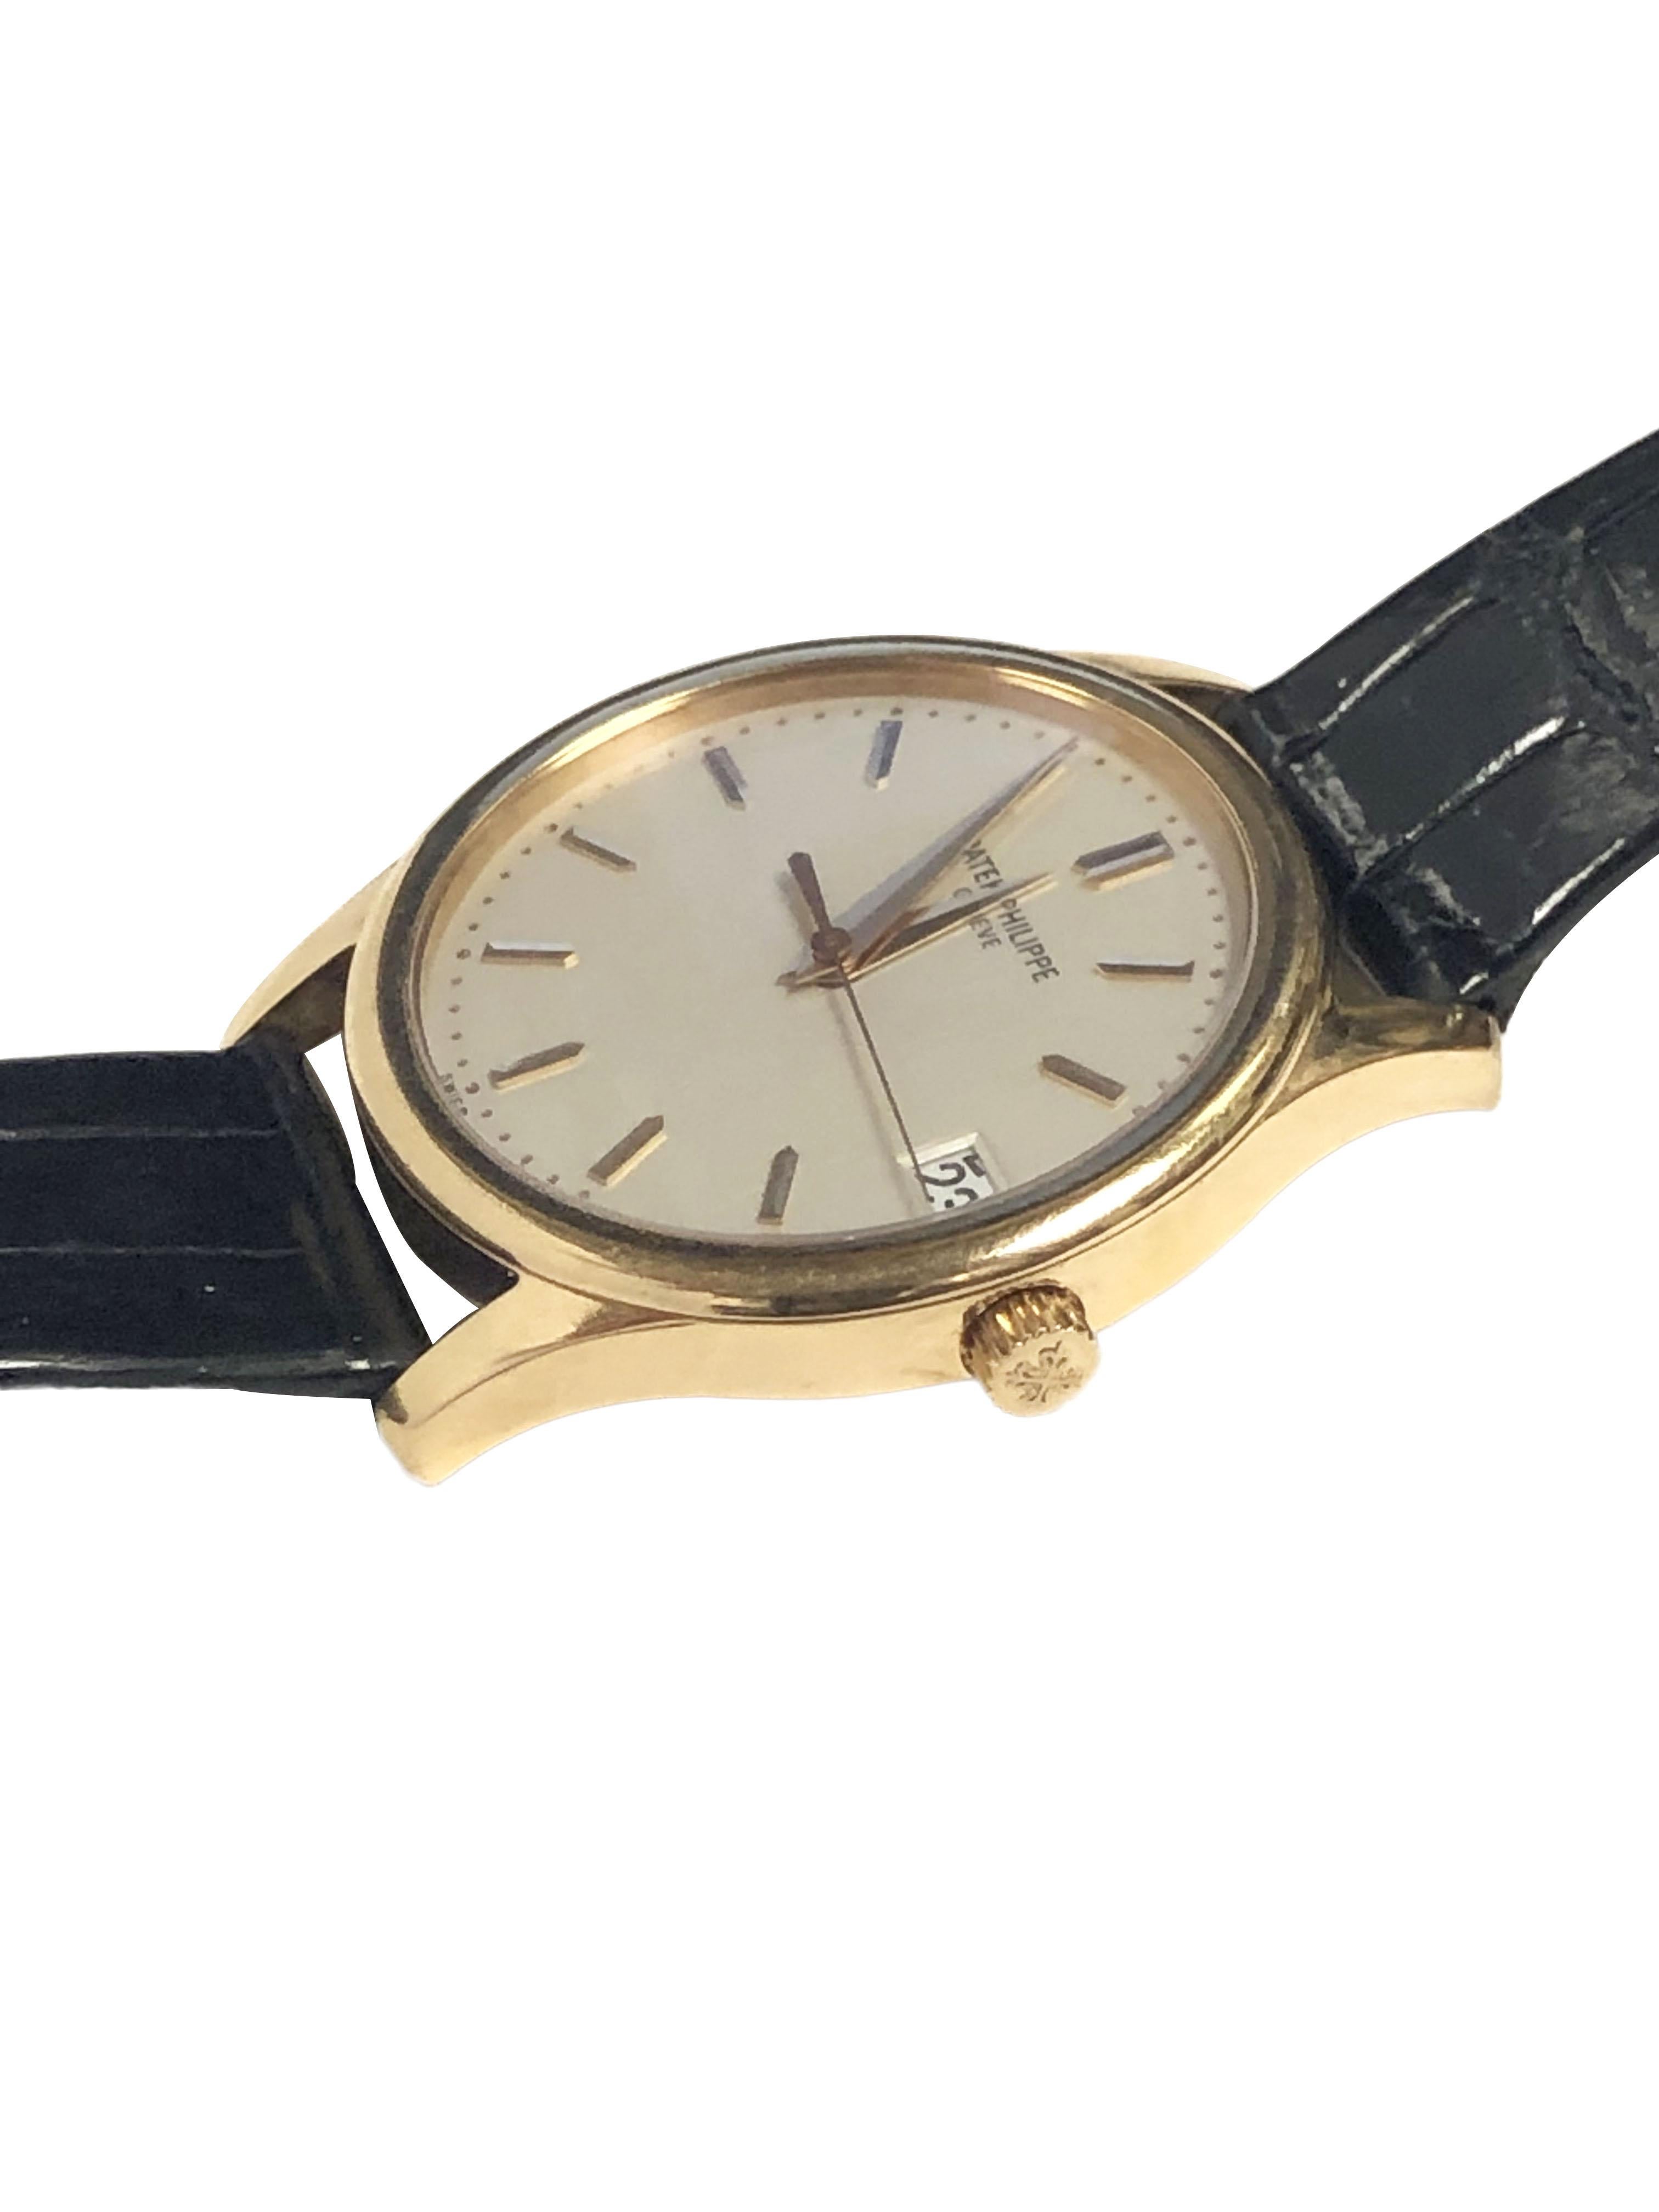 Circa 2000 Patek Philippe Wrist Watch 18k Yellow Gold 34 M.M. 3 piece Water Resistant case, Automatic self-winding movement. Rhodium-plated, fausses cotes decoration, straight-line lever escapement, mono-metallic balance adjusted to heat, cold,